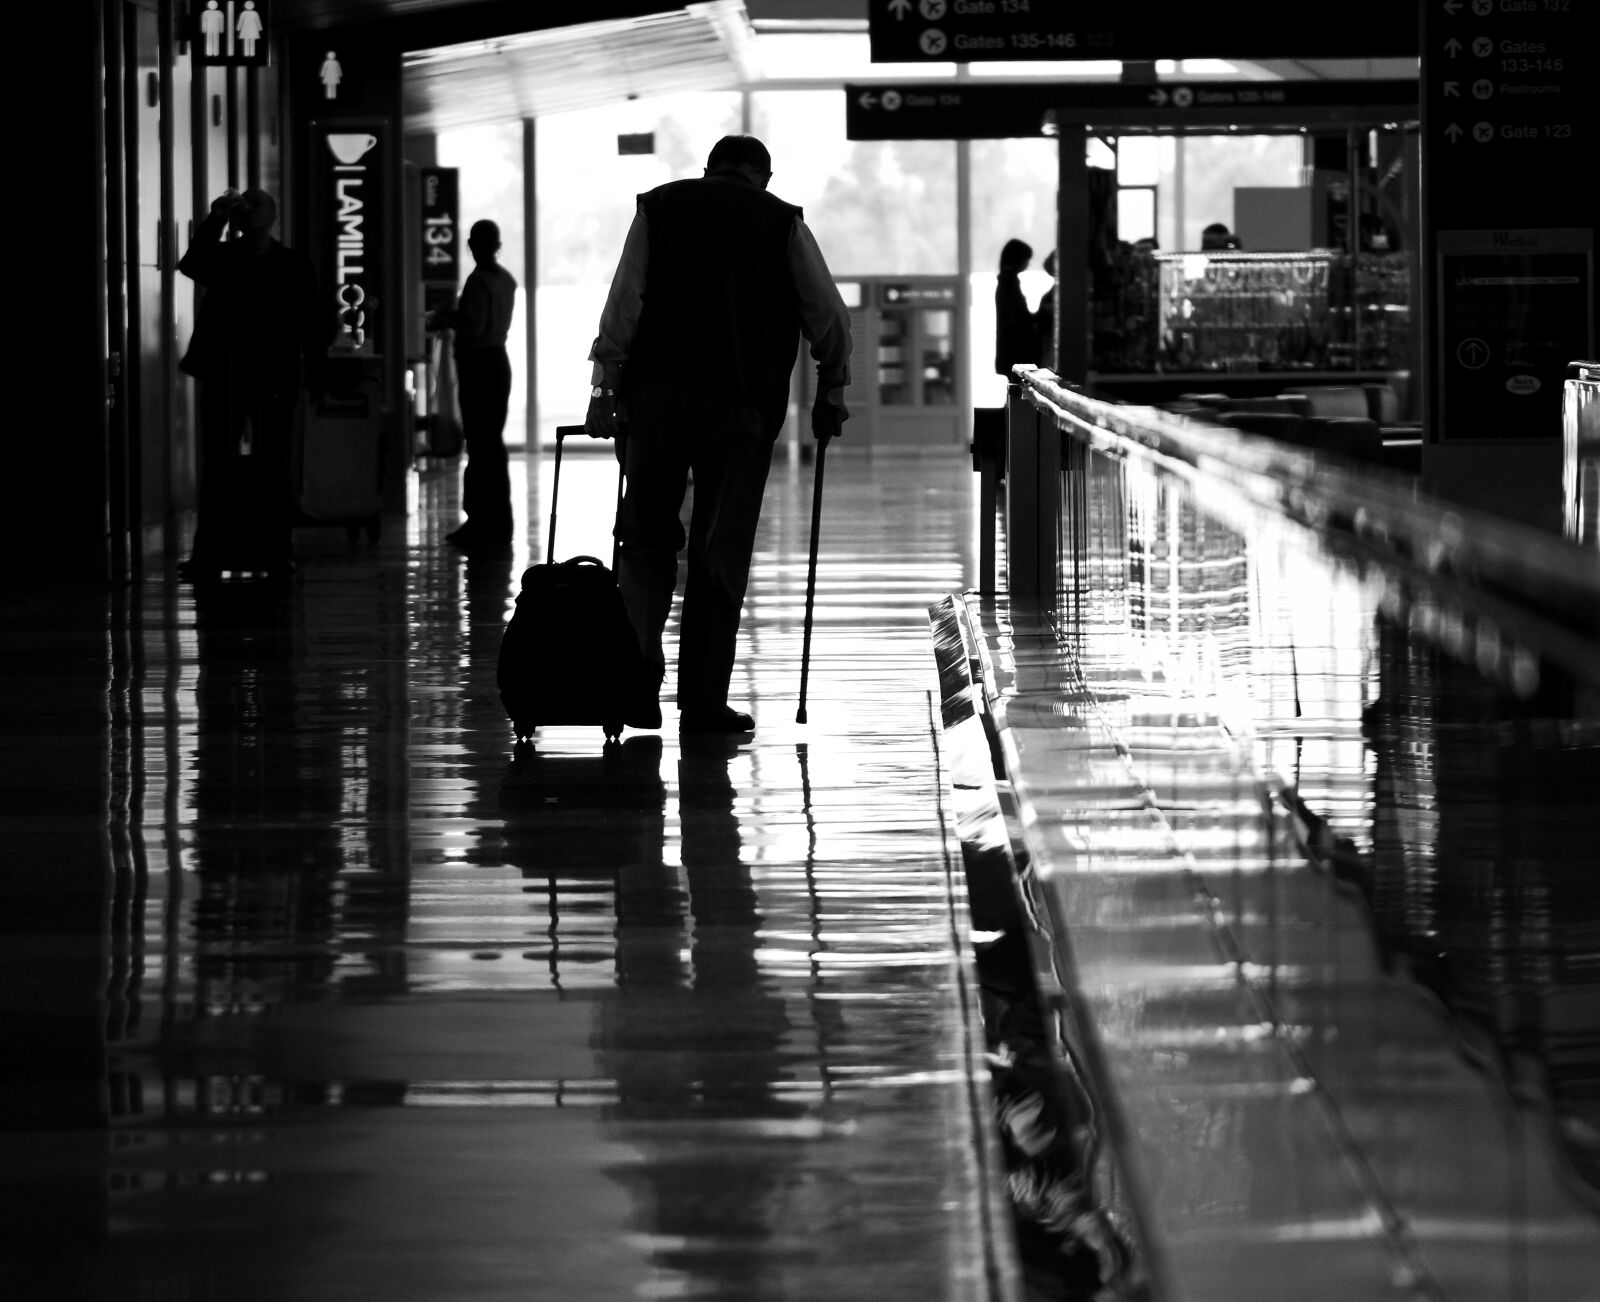 Samsung NX3000 sample photo. Silhouette, airport, bw photography